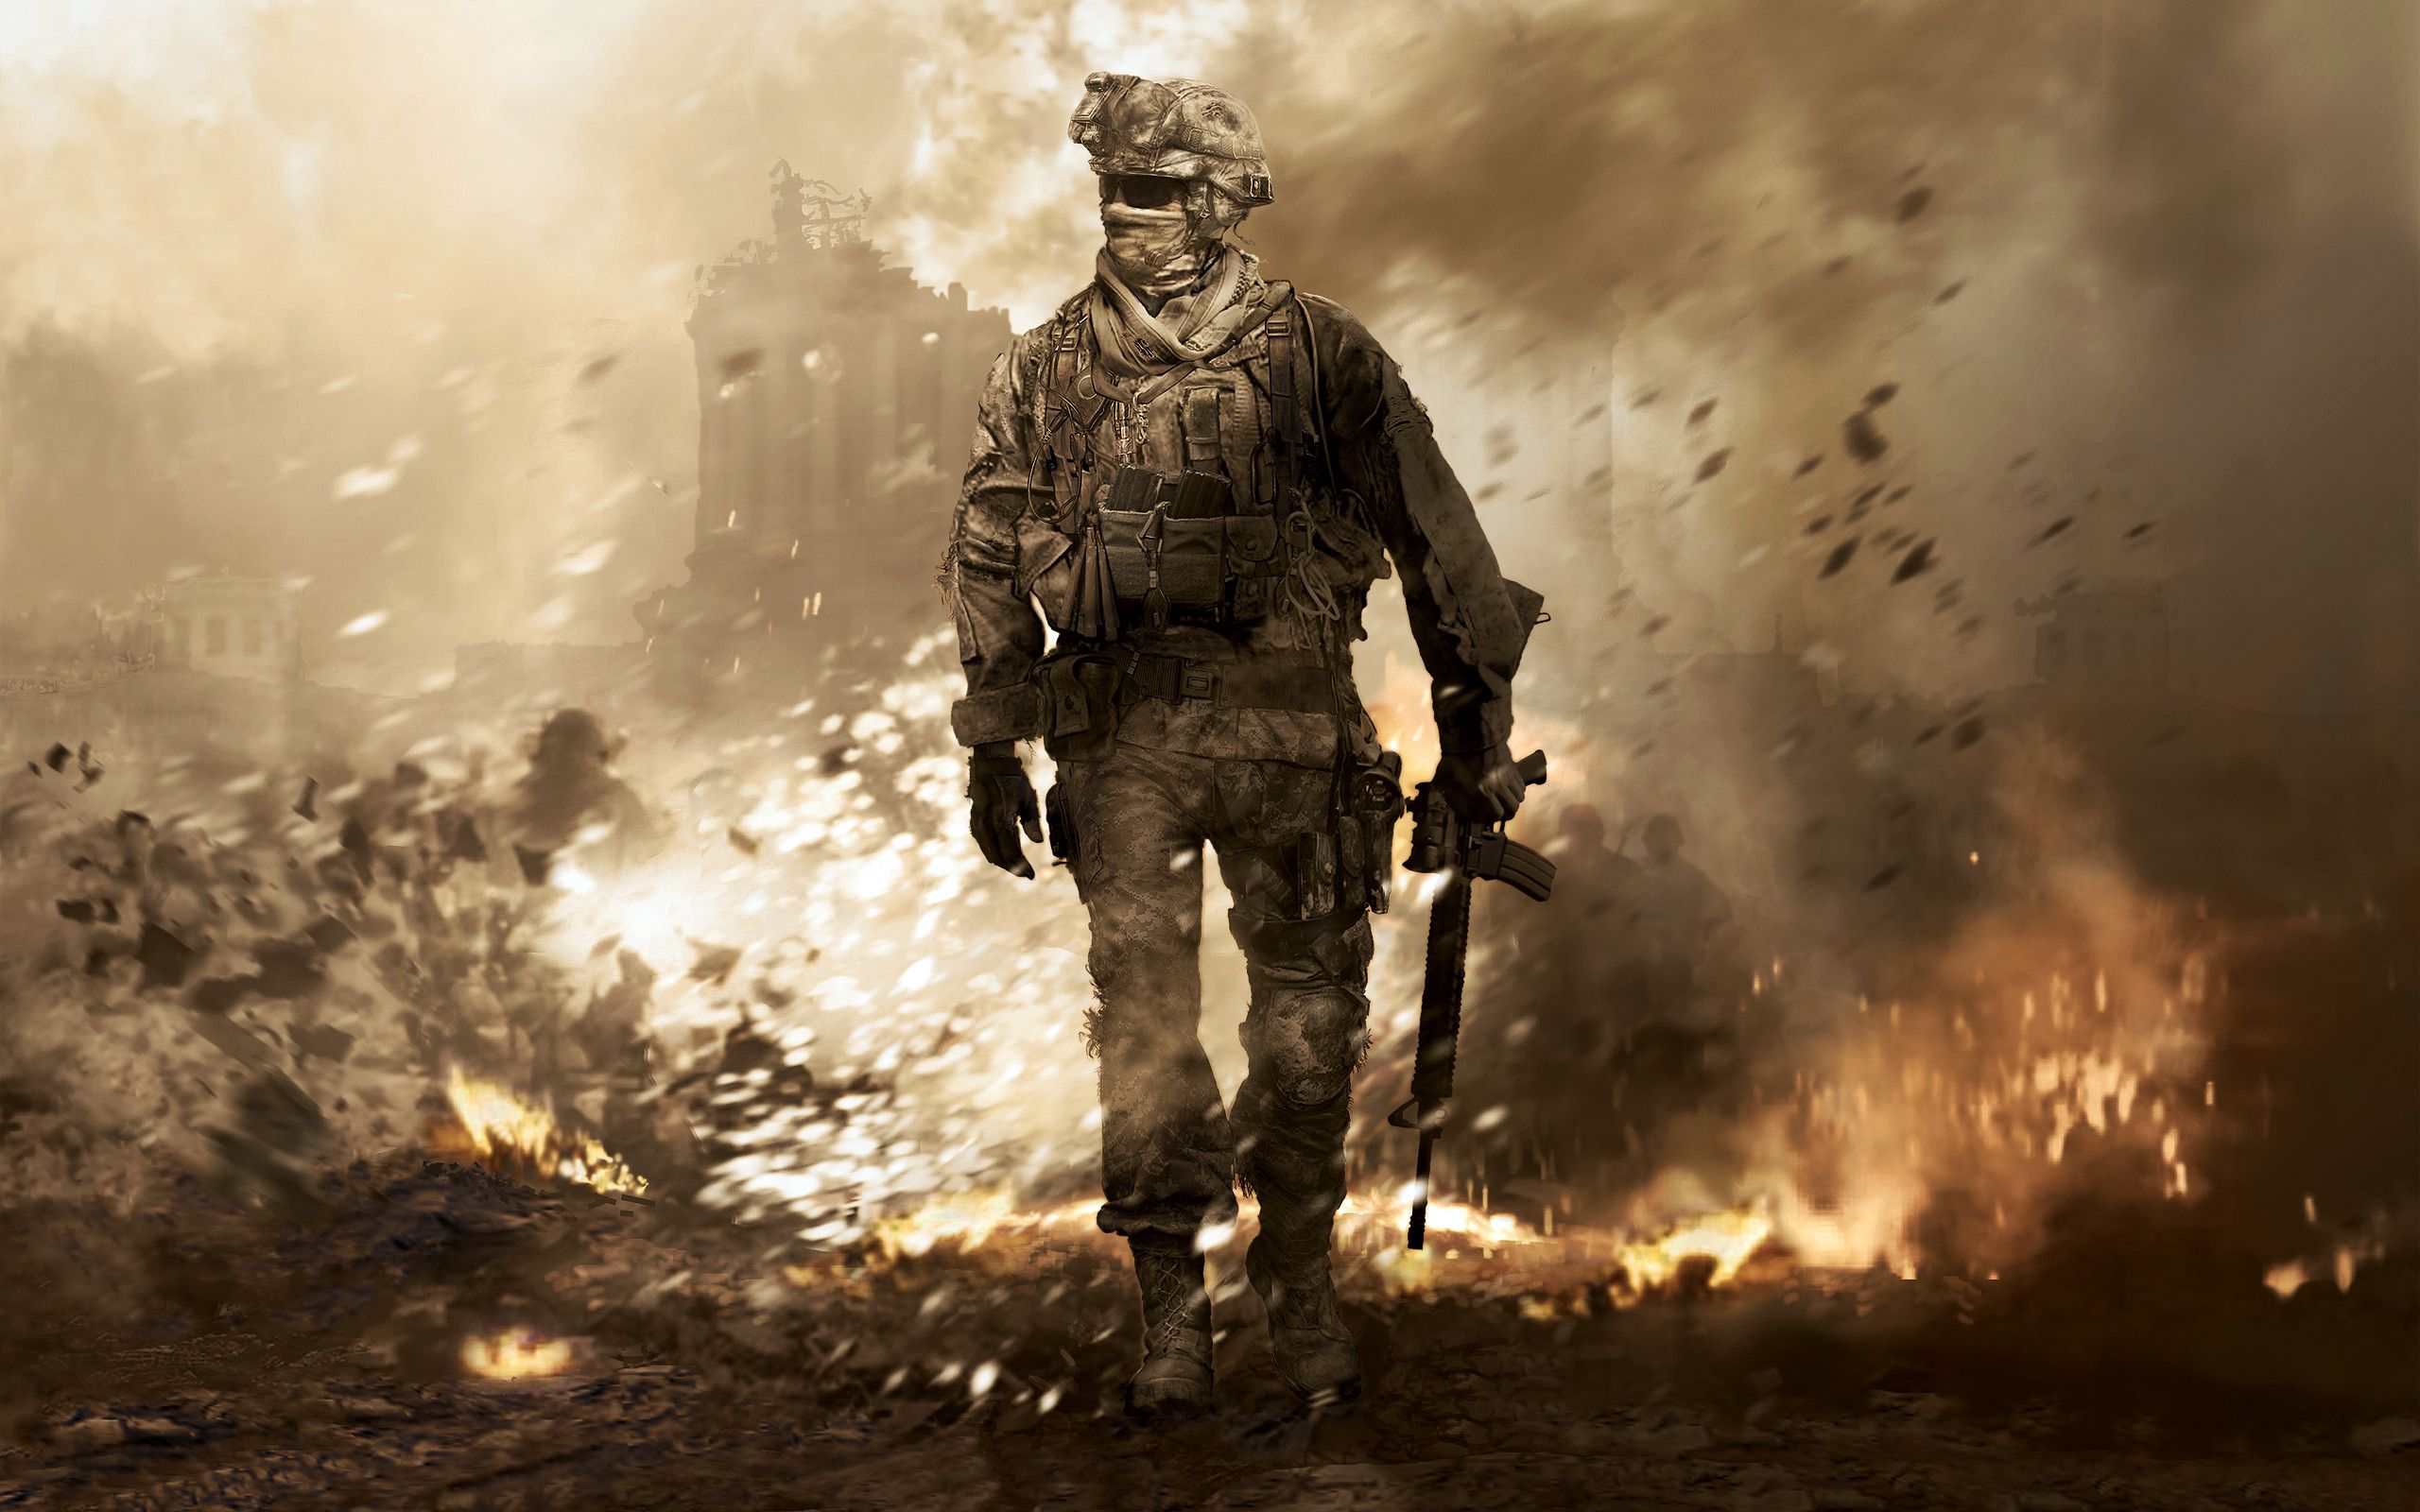 Call of duty 1080P, 2K, 4K, 5K HD wallpapers free download